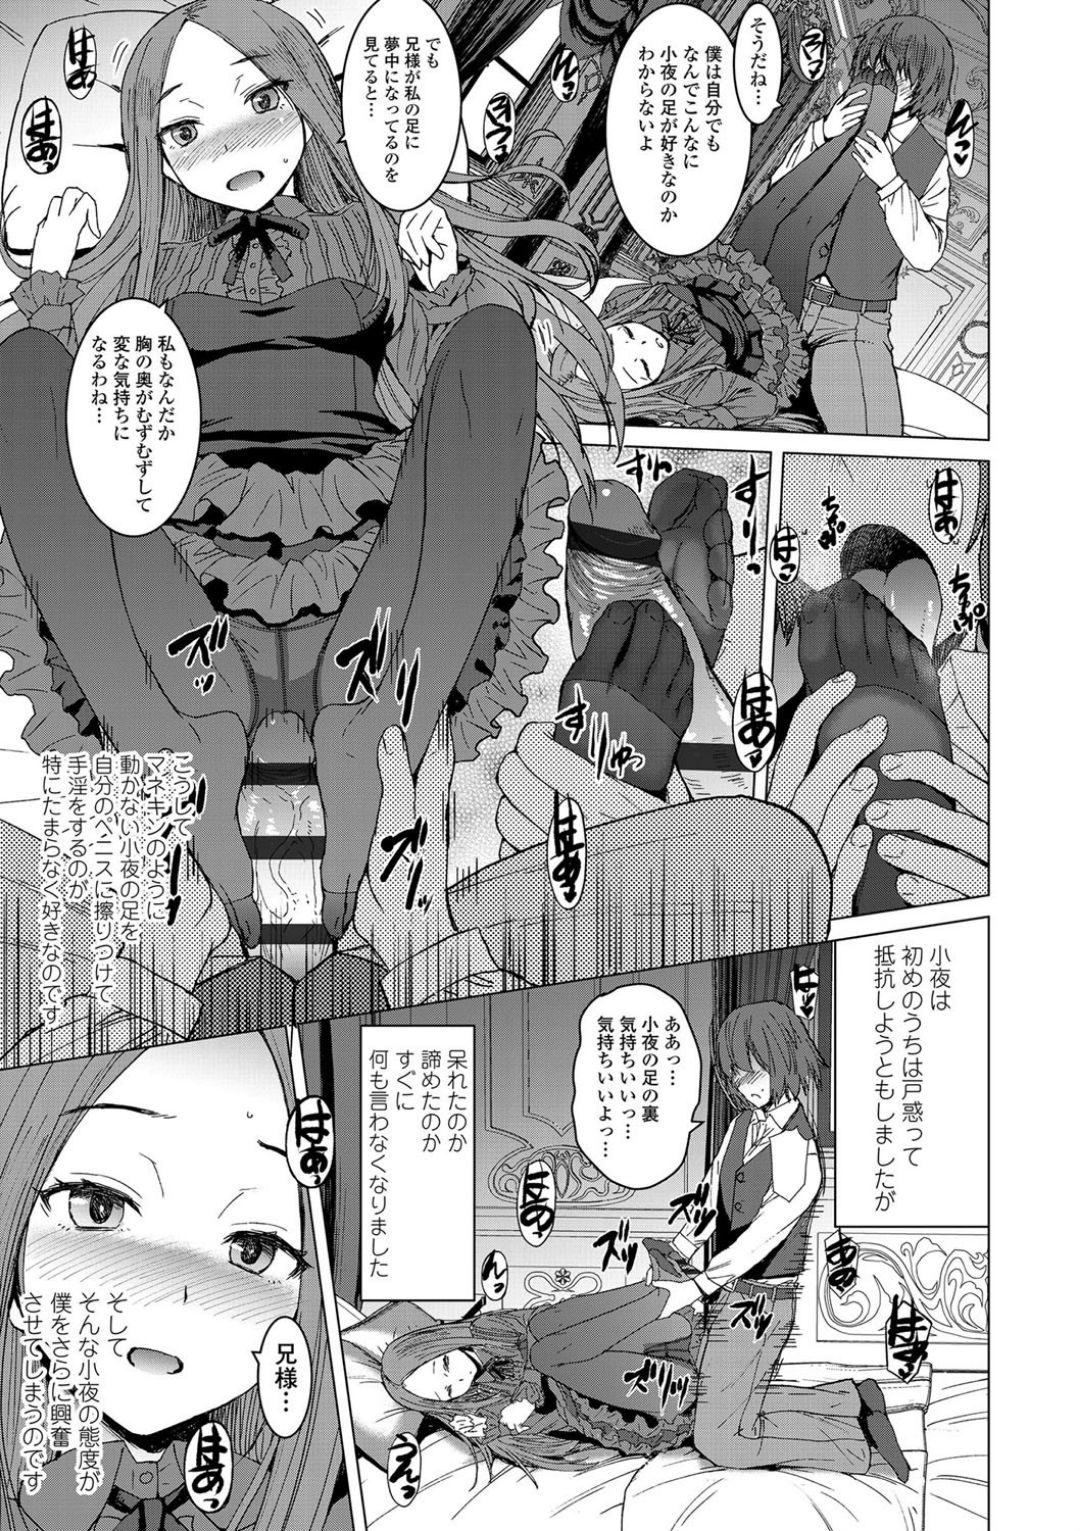 Two Aisarete Miru? - Do you want to be dominated? Culo - Page 7